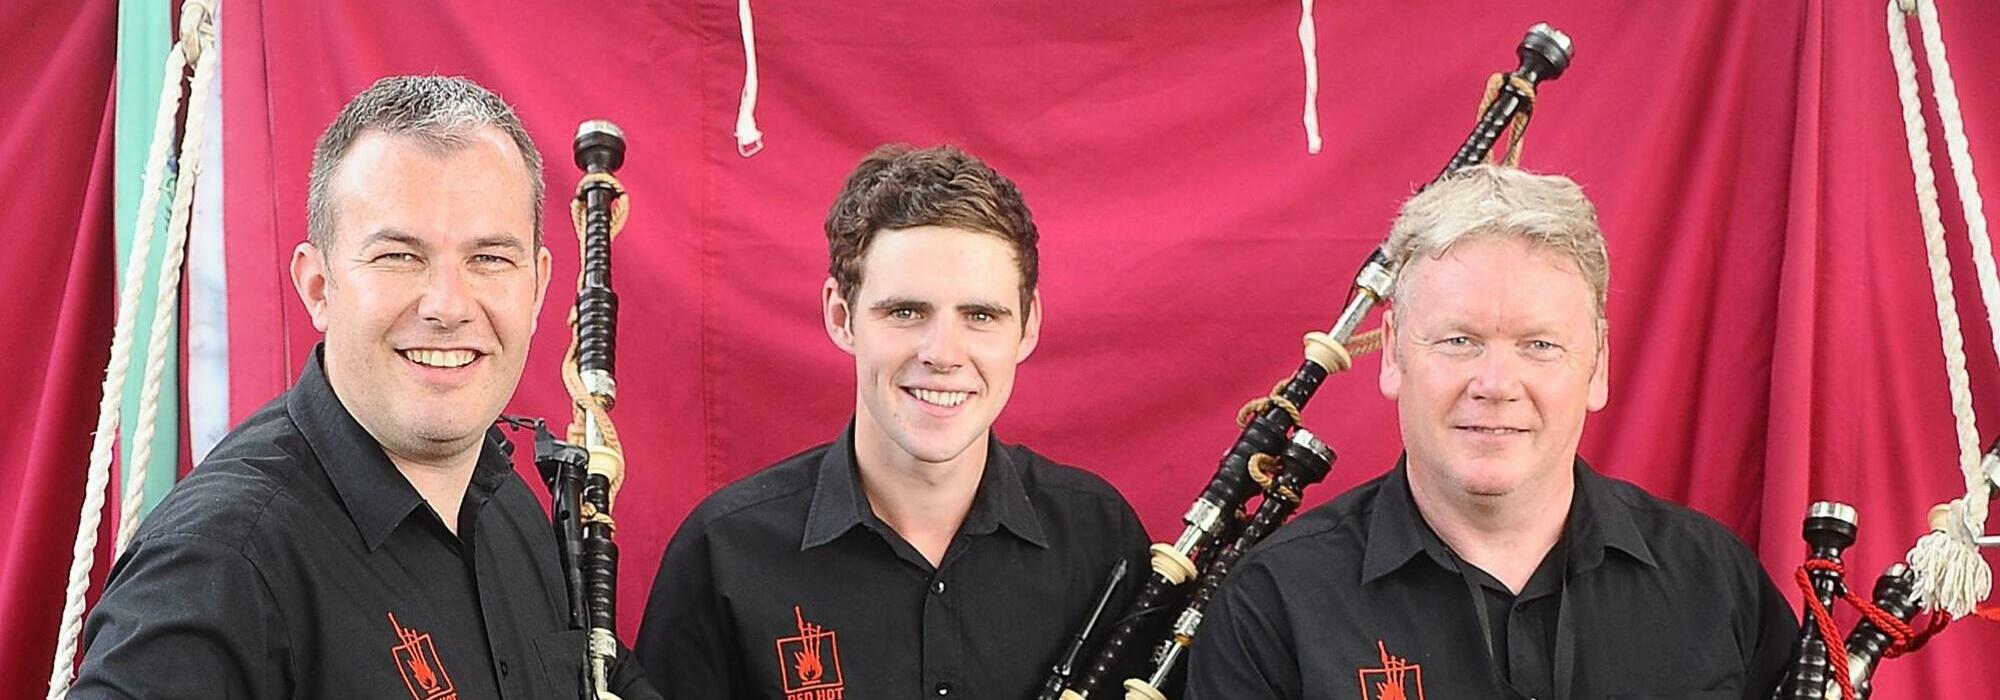 A Red Hot Chilli Pipers live event